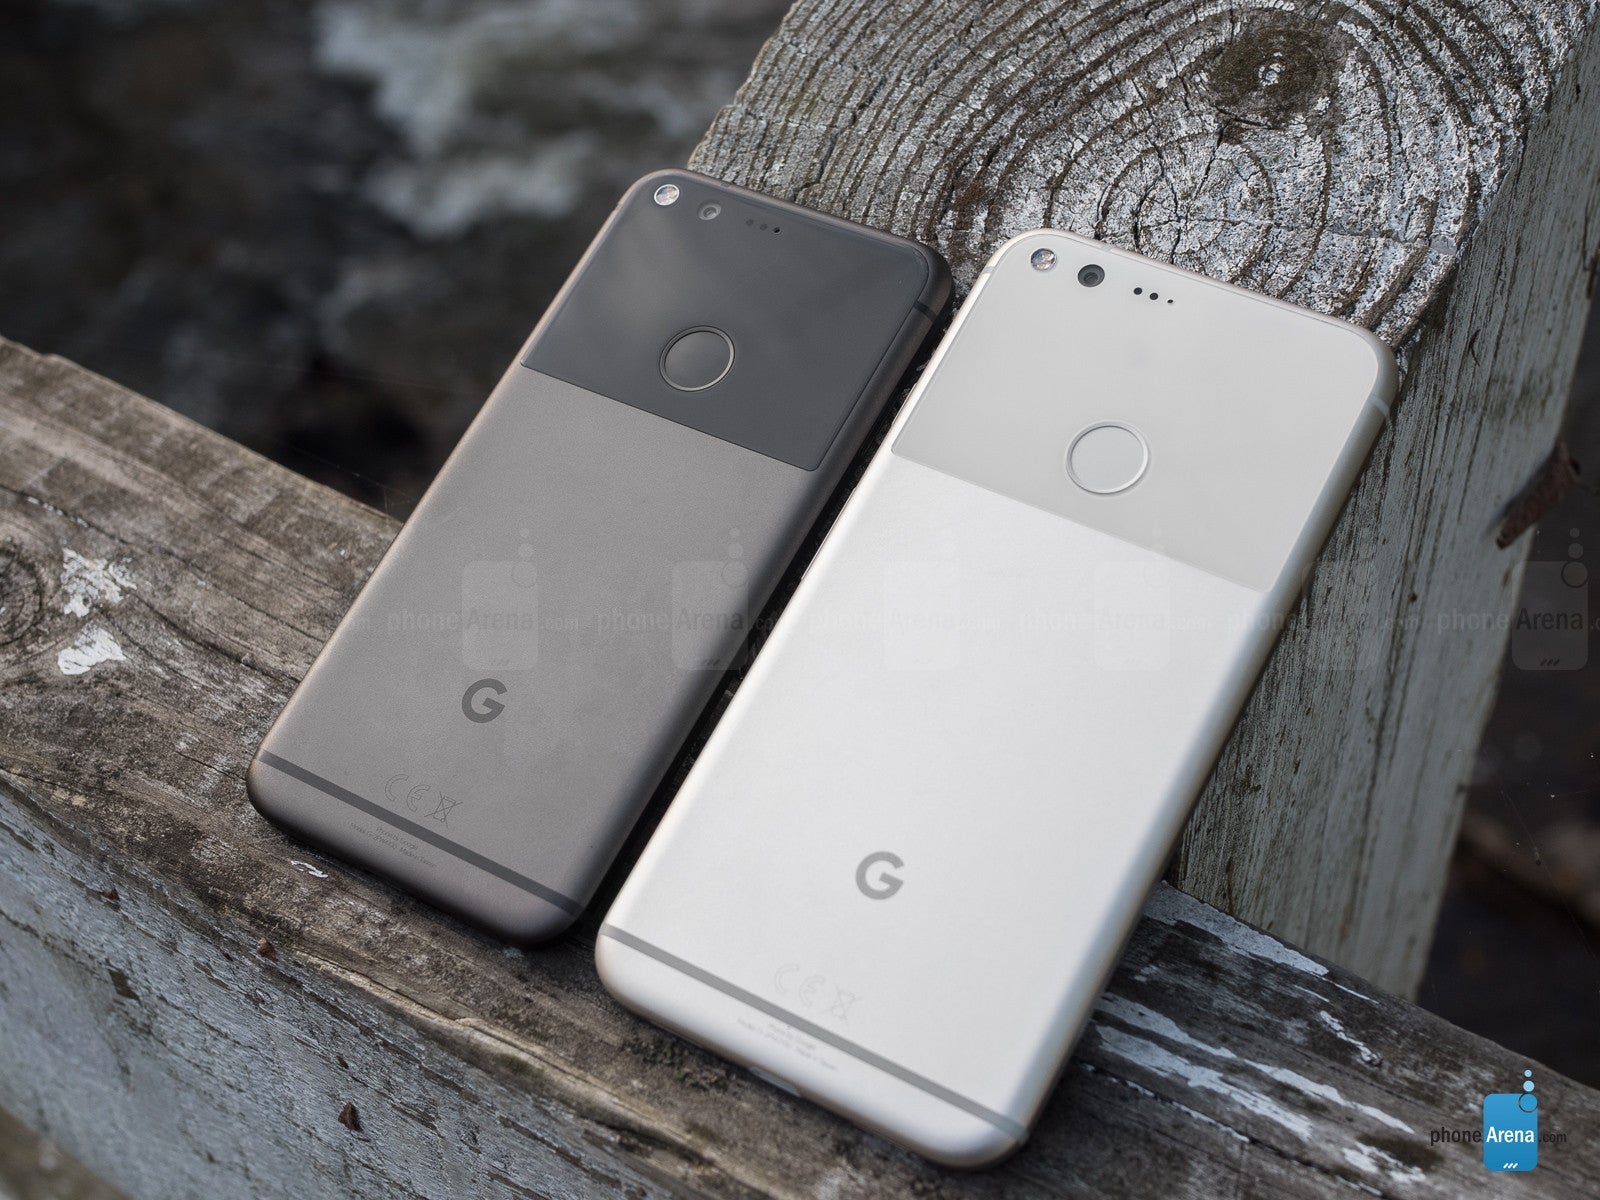 Google wants to hear your thoughts on the Pixels' design